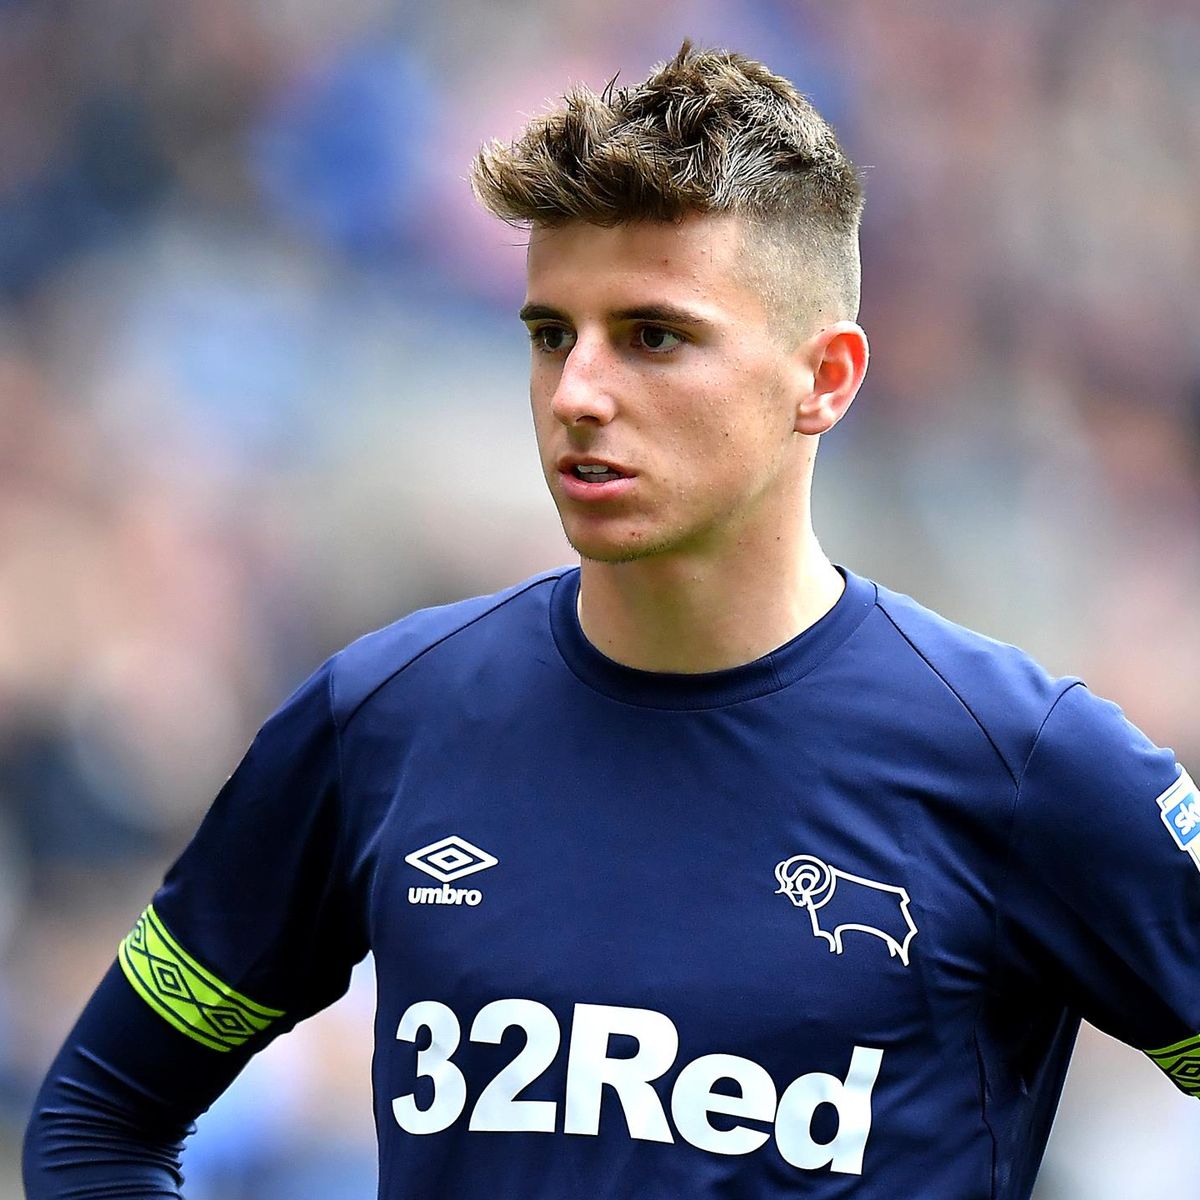 what is the name of this hairstyle Mason Mount Chelsea player  Scrolller